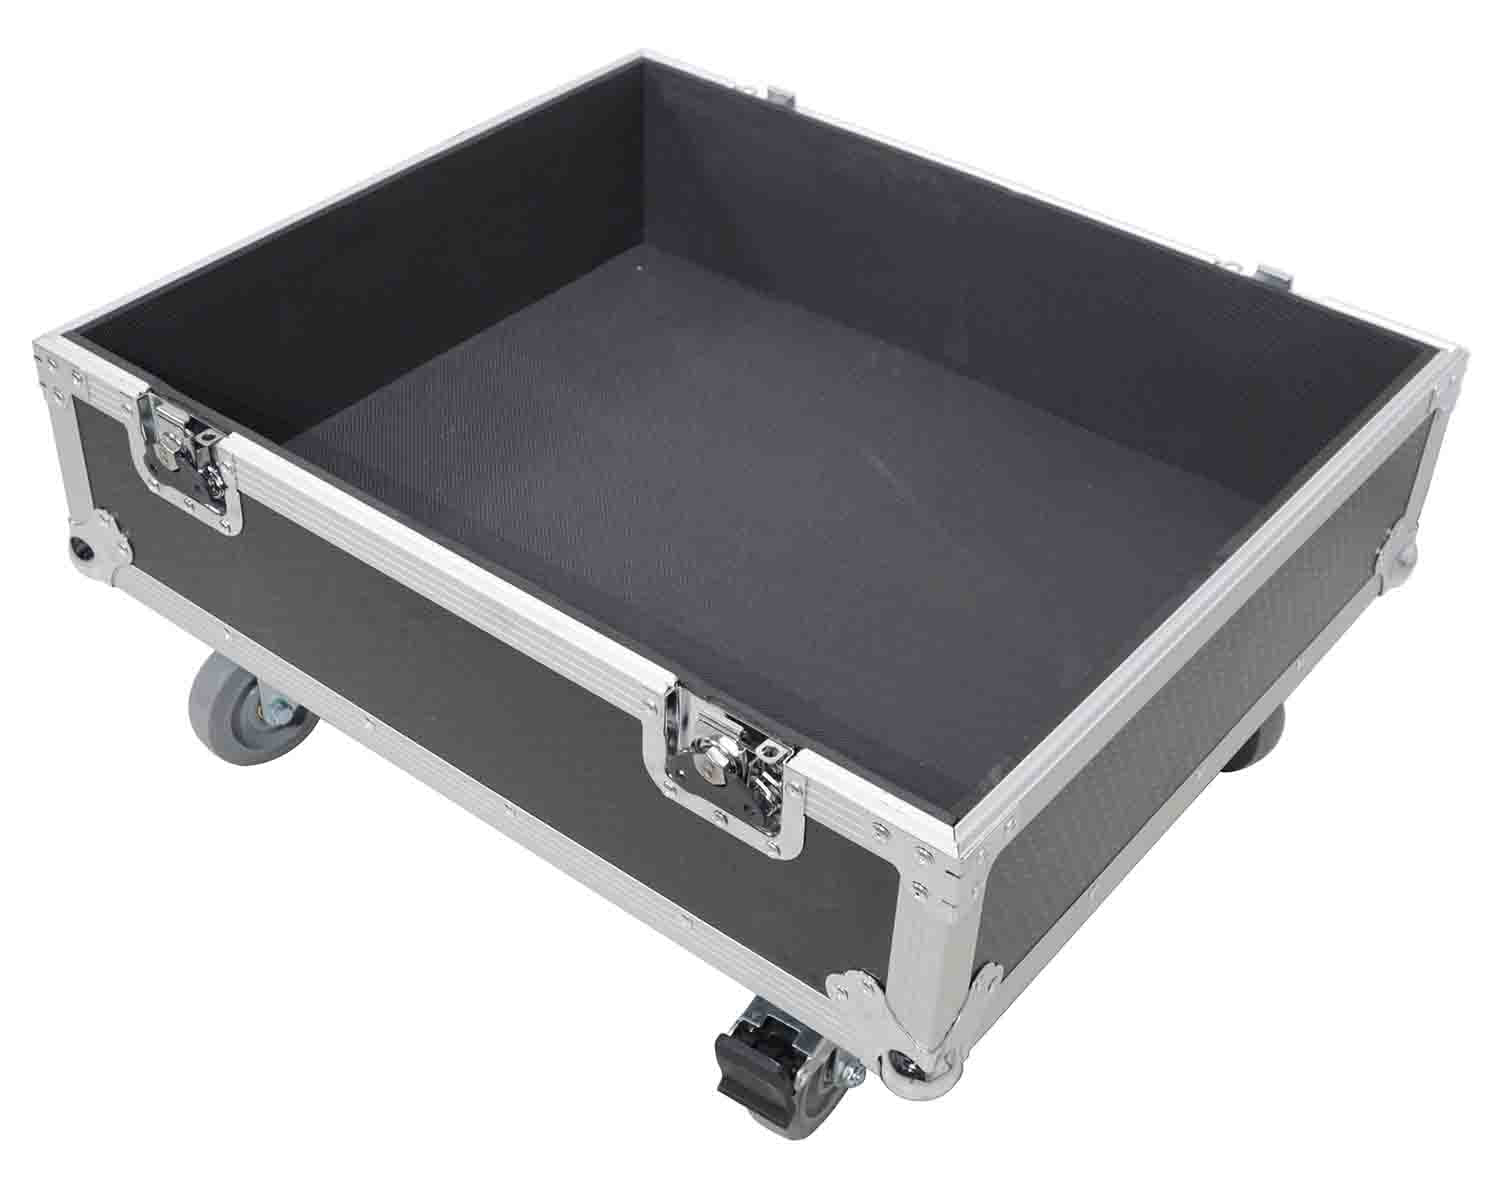 B-Stock: ProX XS-252521SPW Subwoofer Speaker Flight Case with Casters Interior - Hollywood DJ